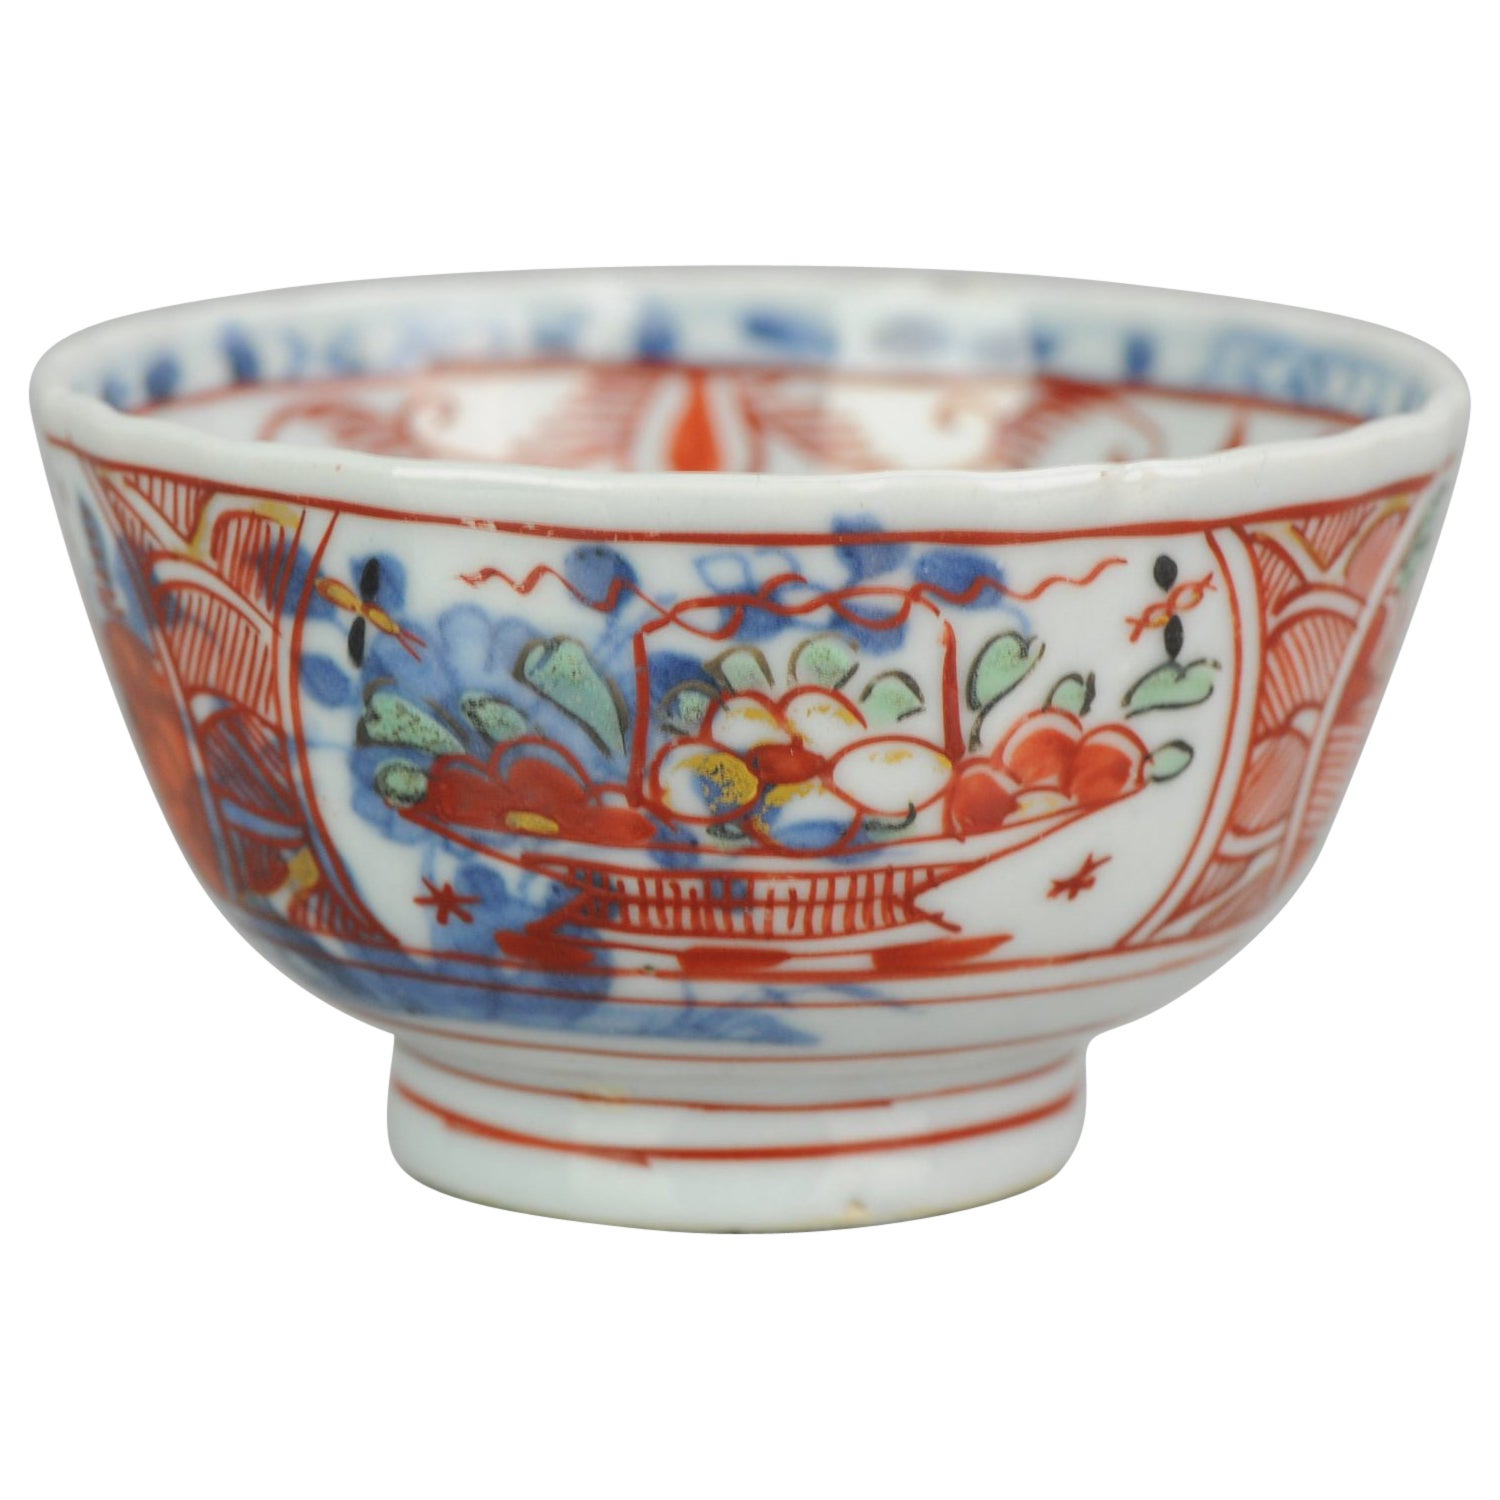 Antique Imari Qing Dynasty Chinese Porcelain Amsterdams Bont Bowl, 18th Cen For Sale